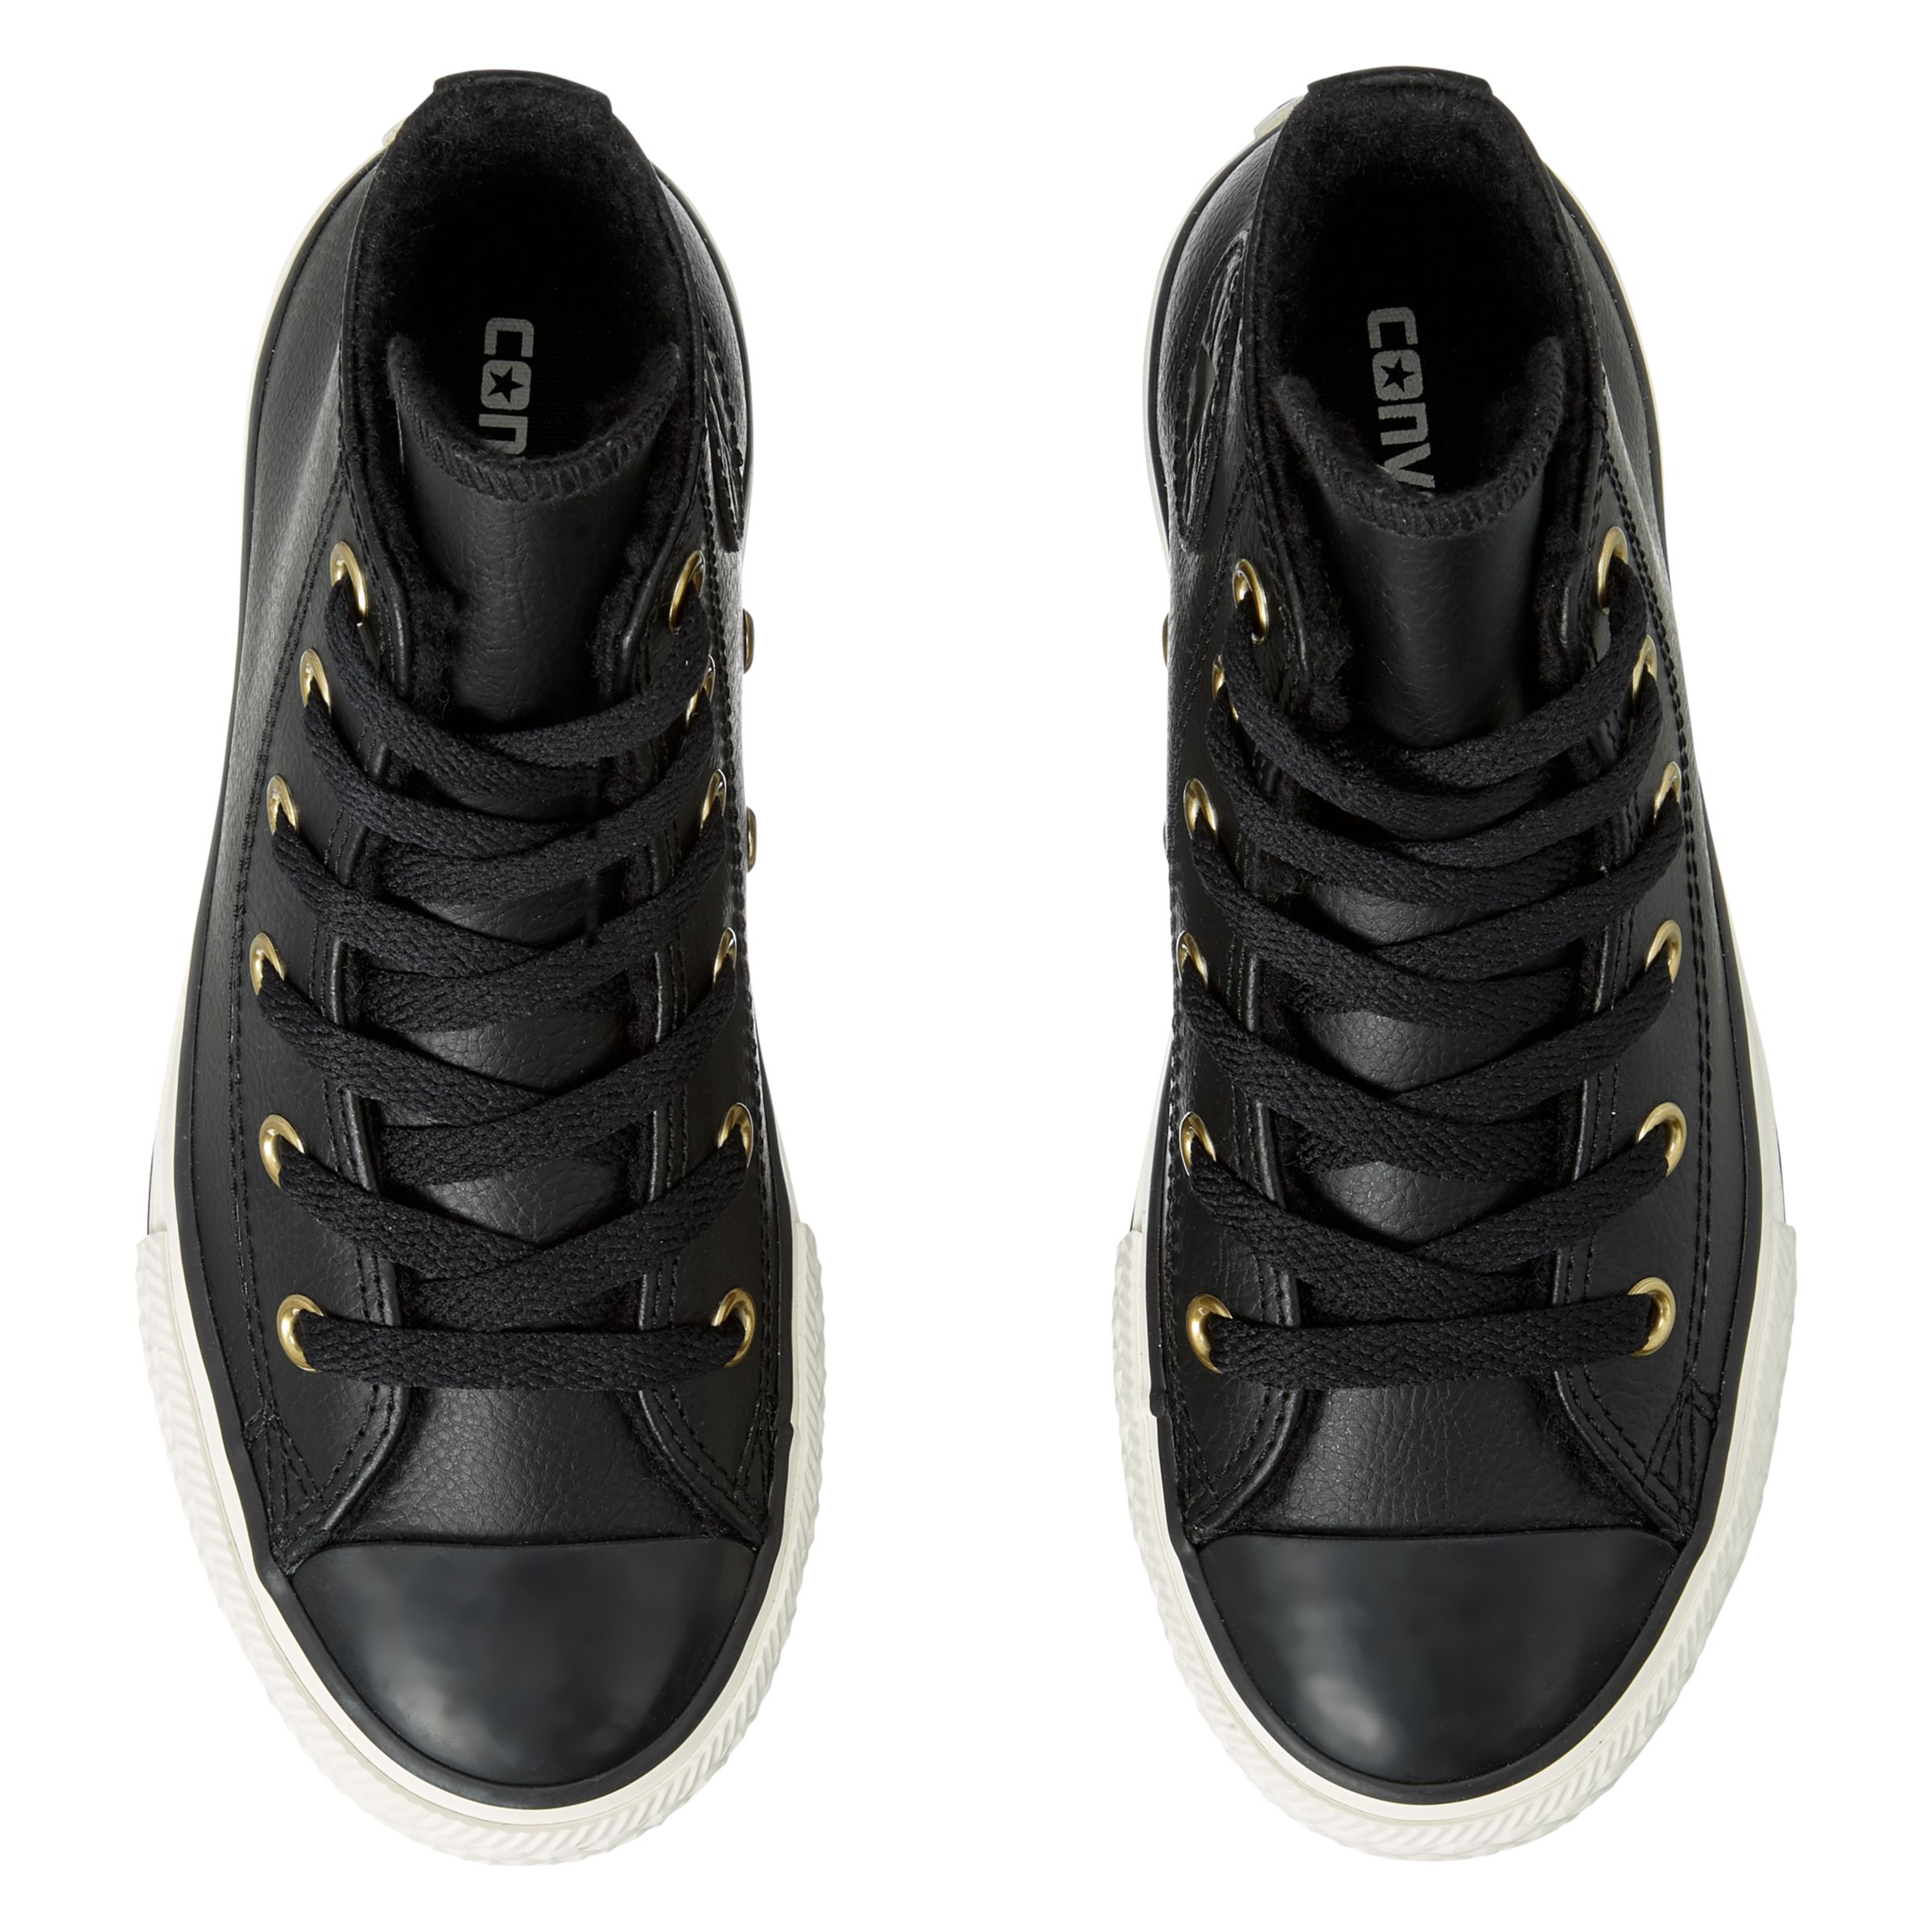 converse all star leather high top